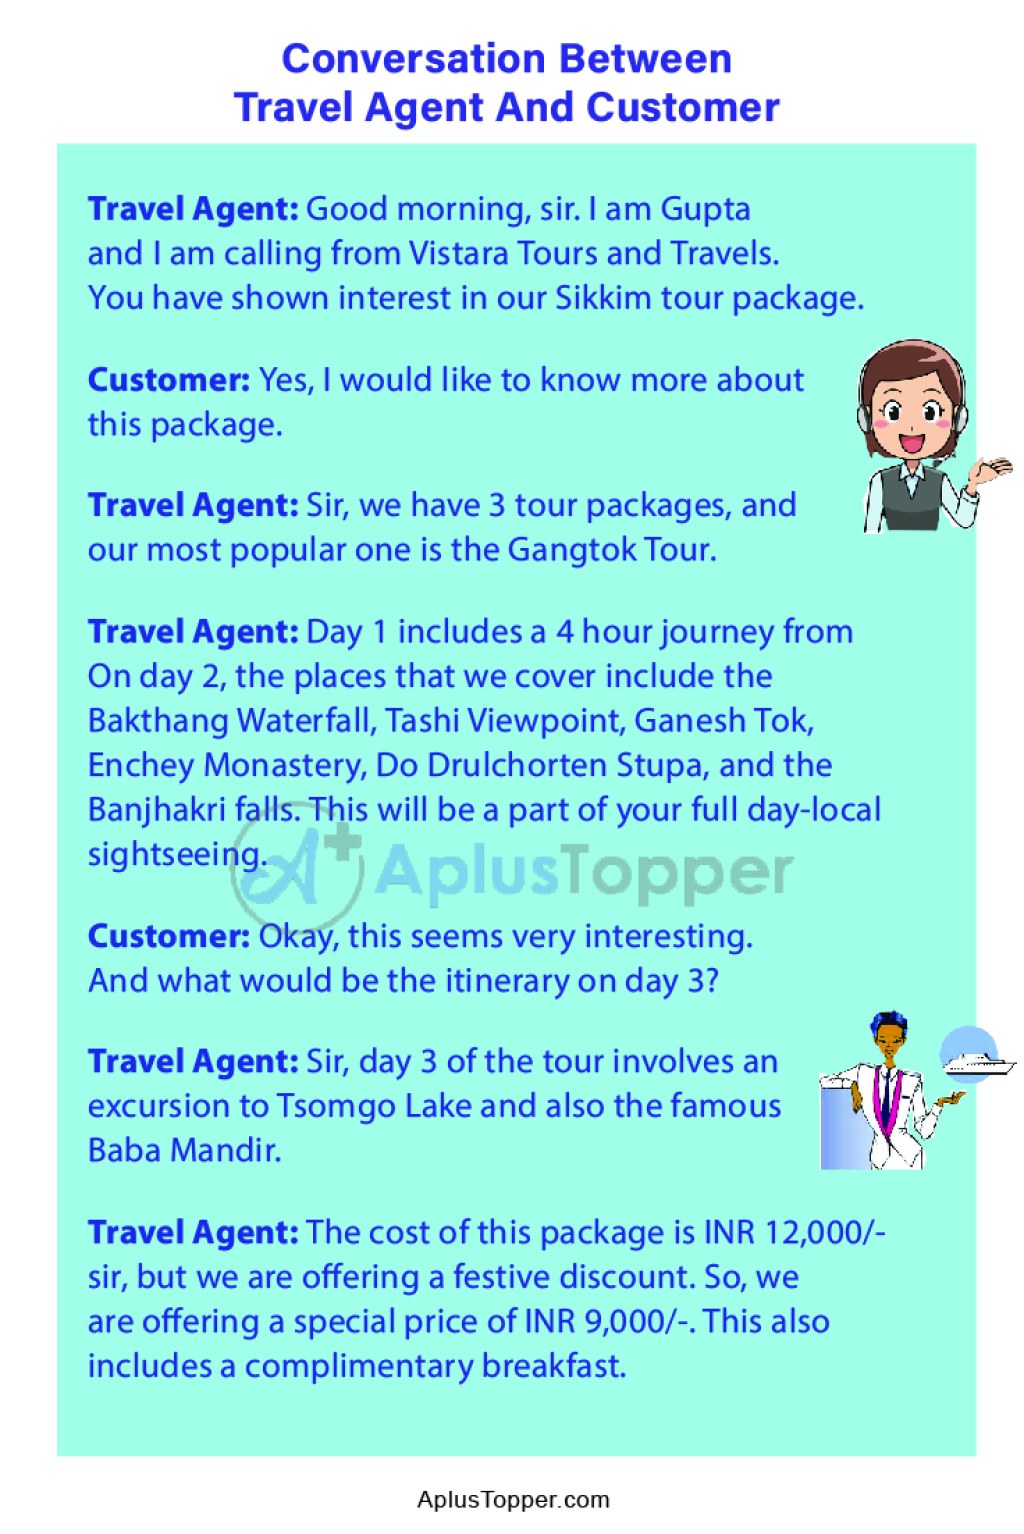 Picture of: A Simple Conversation Between Travel Agent And Customer in English